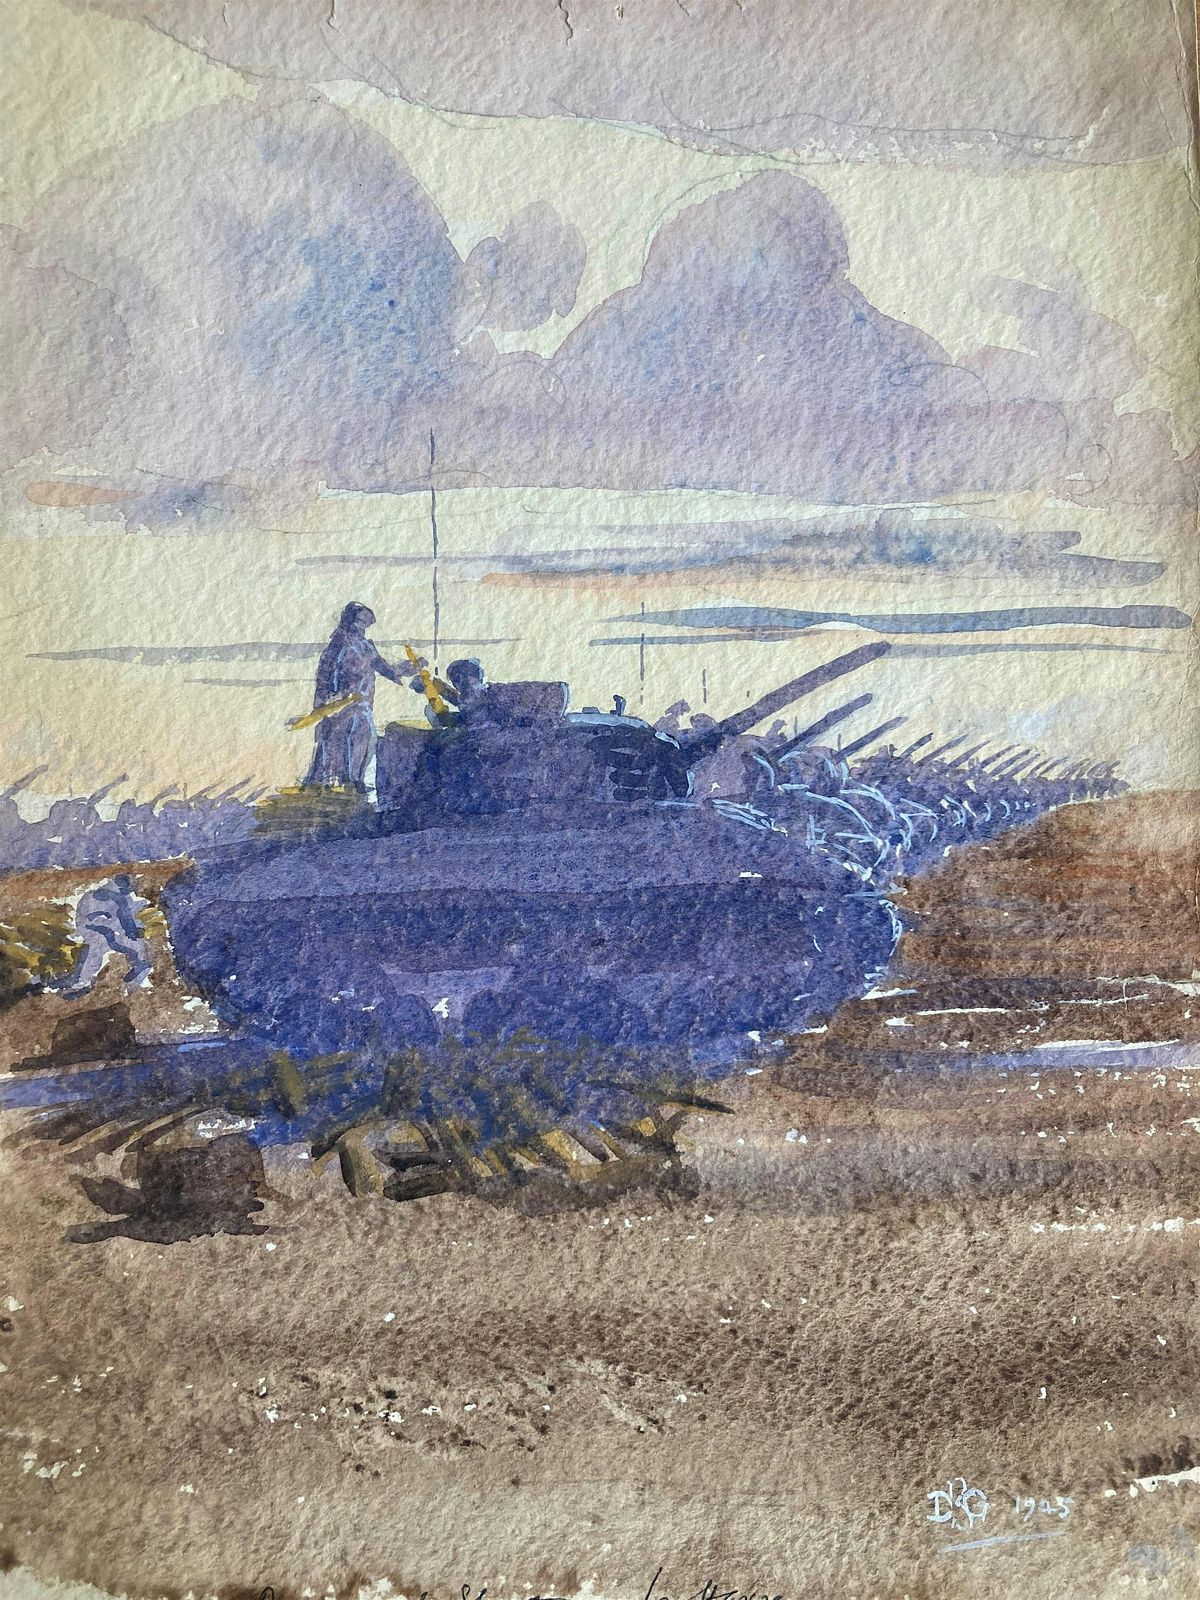 D-Day Commemorative Art History Lecture: Artistic Antidotes